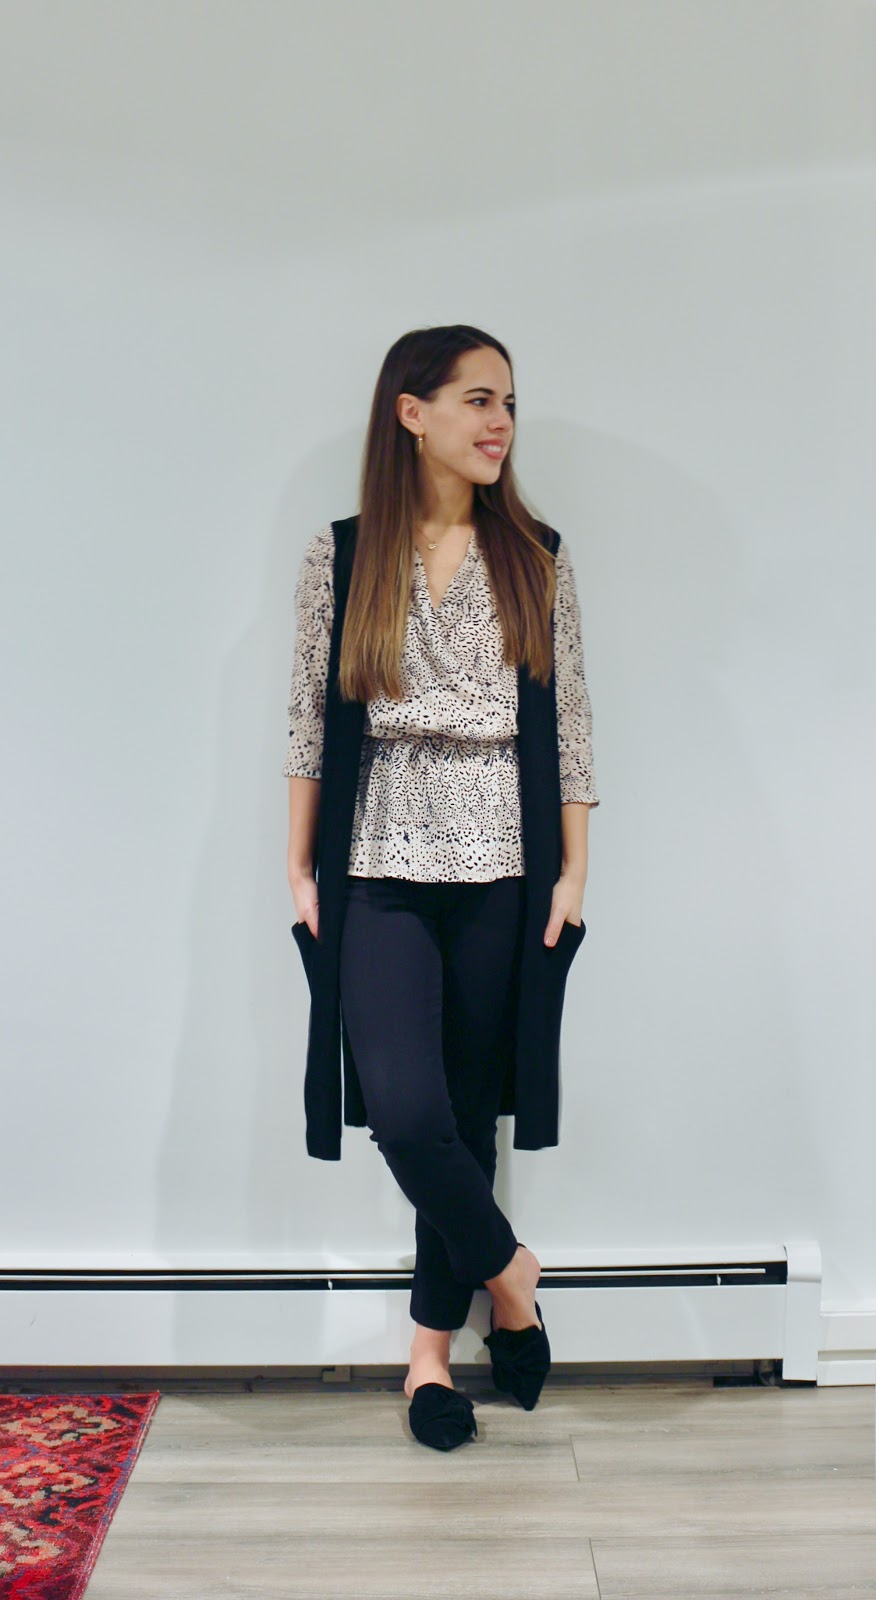 Jules in Flats - Patterned Peplum Blouse with Olivie Sweater Vest (Business Casual Winter Workwear on a Budget)